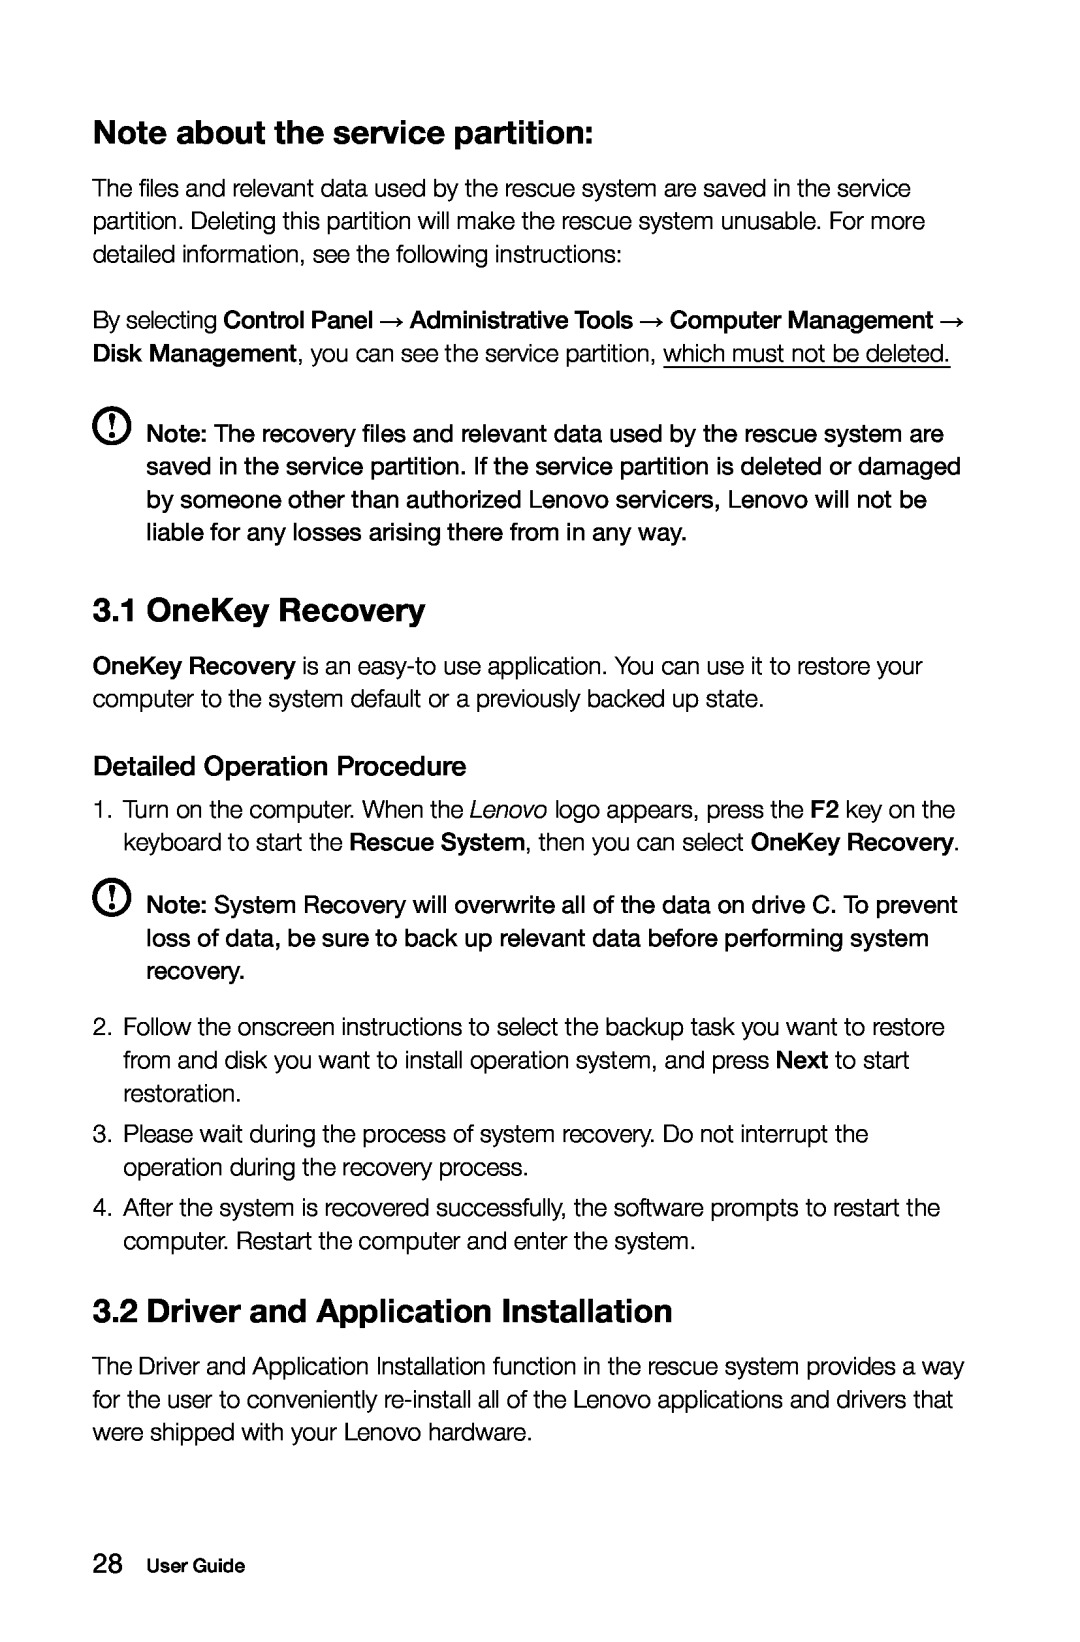 Lenovo B3, 10051, 10052 manual Note about the service partition, OneKey Recovery, Driver and Application Installation 